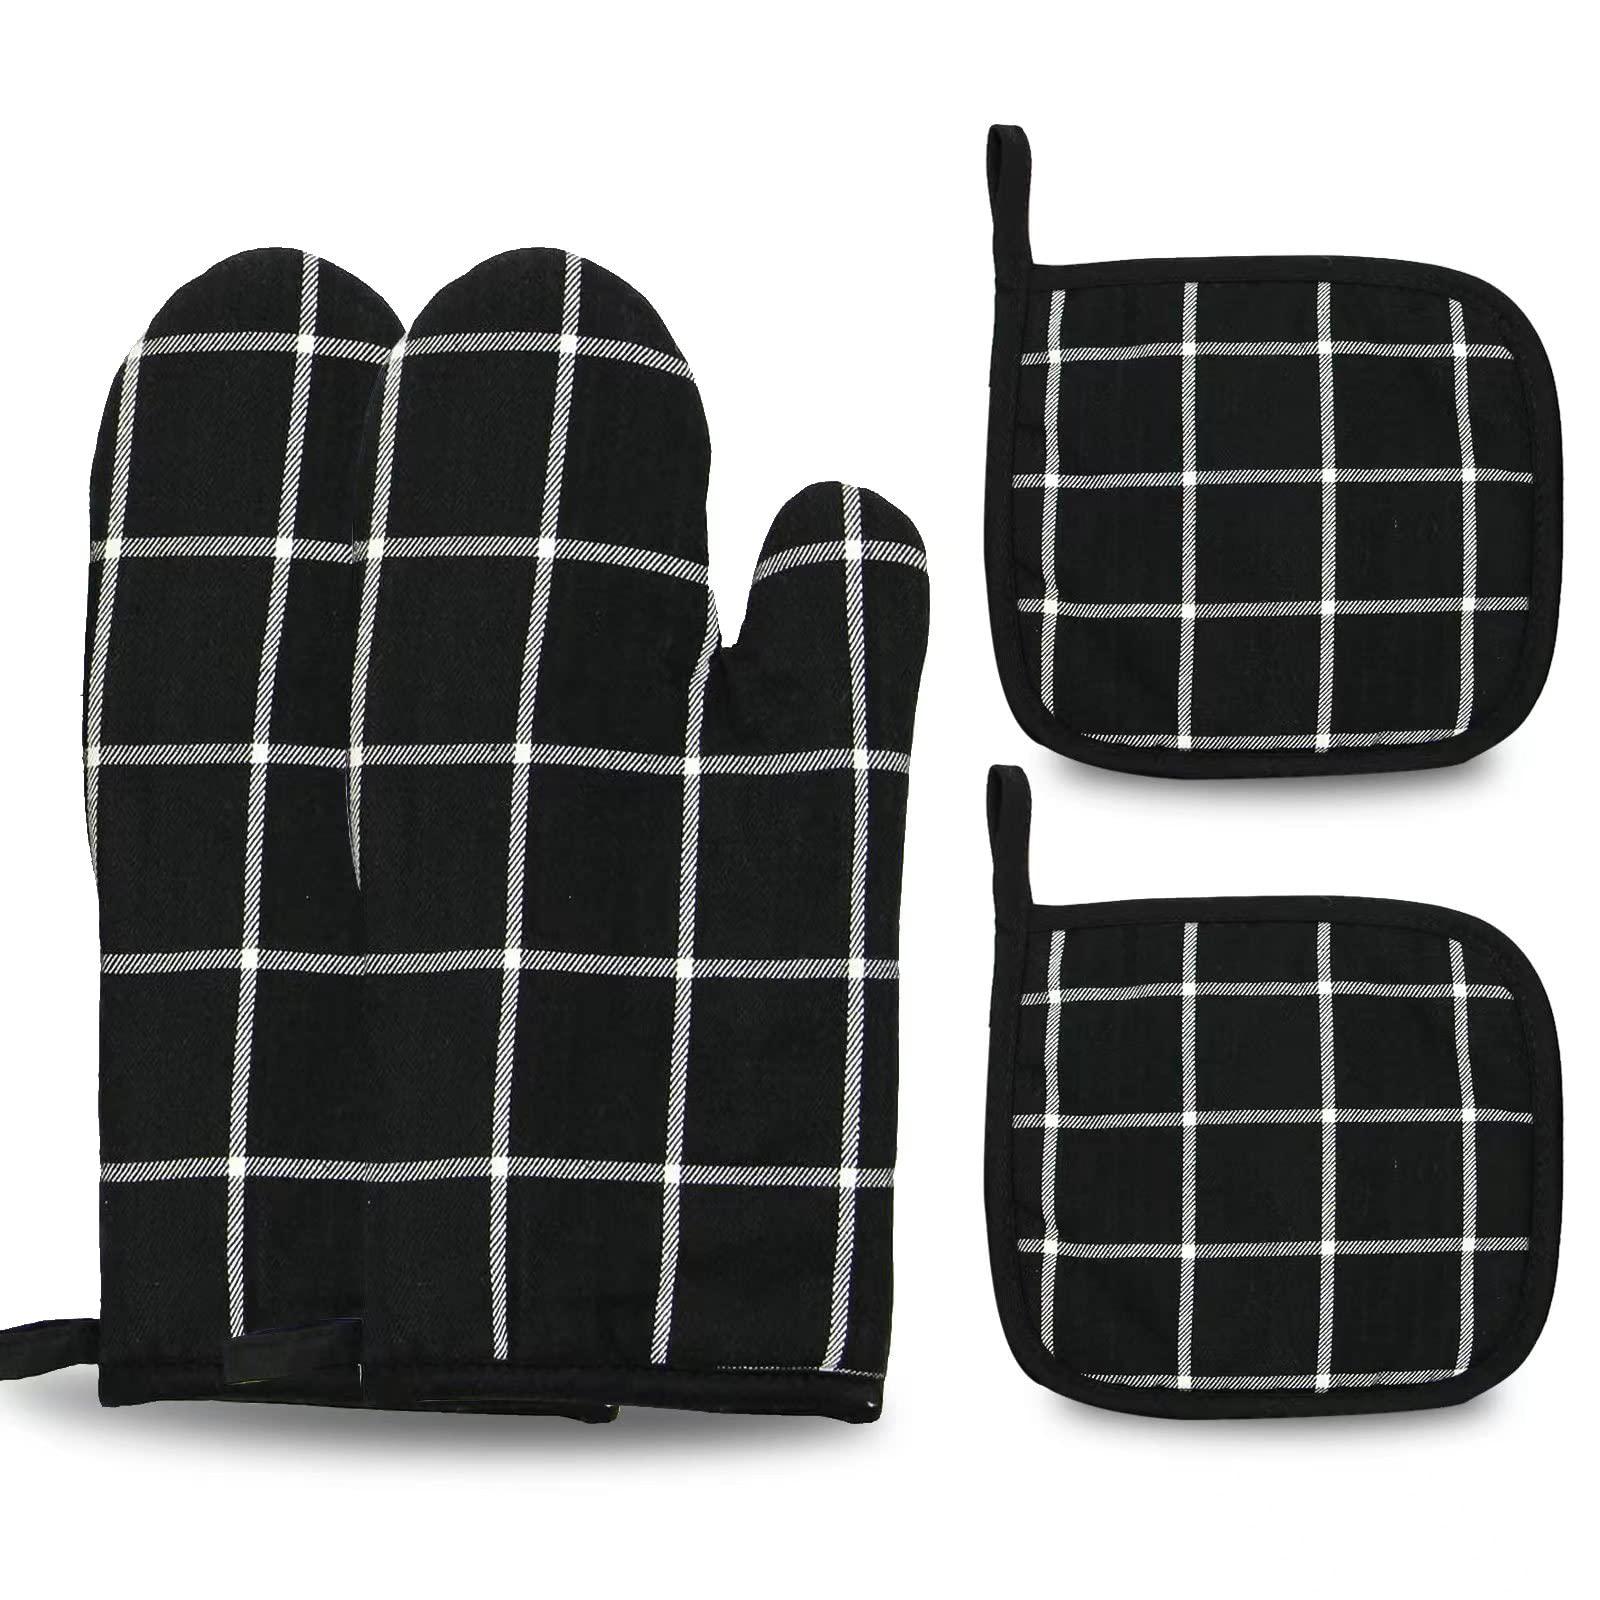 coekmoed oven mitts and pot holders set of 4 piece, heat resistant